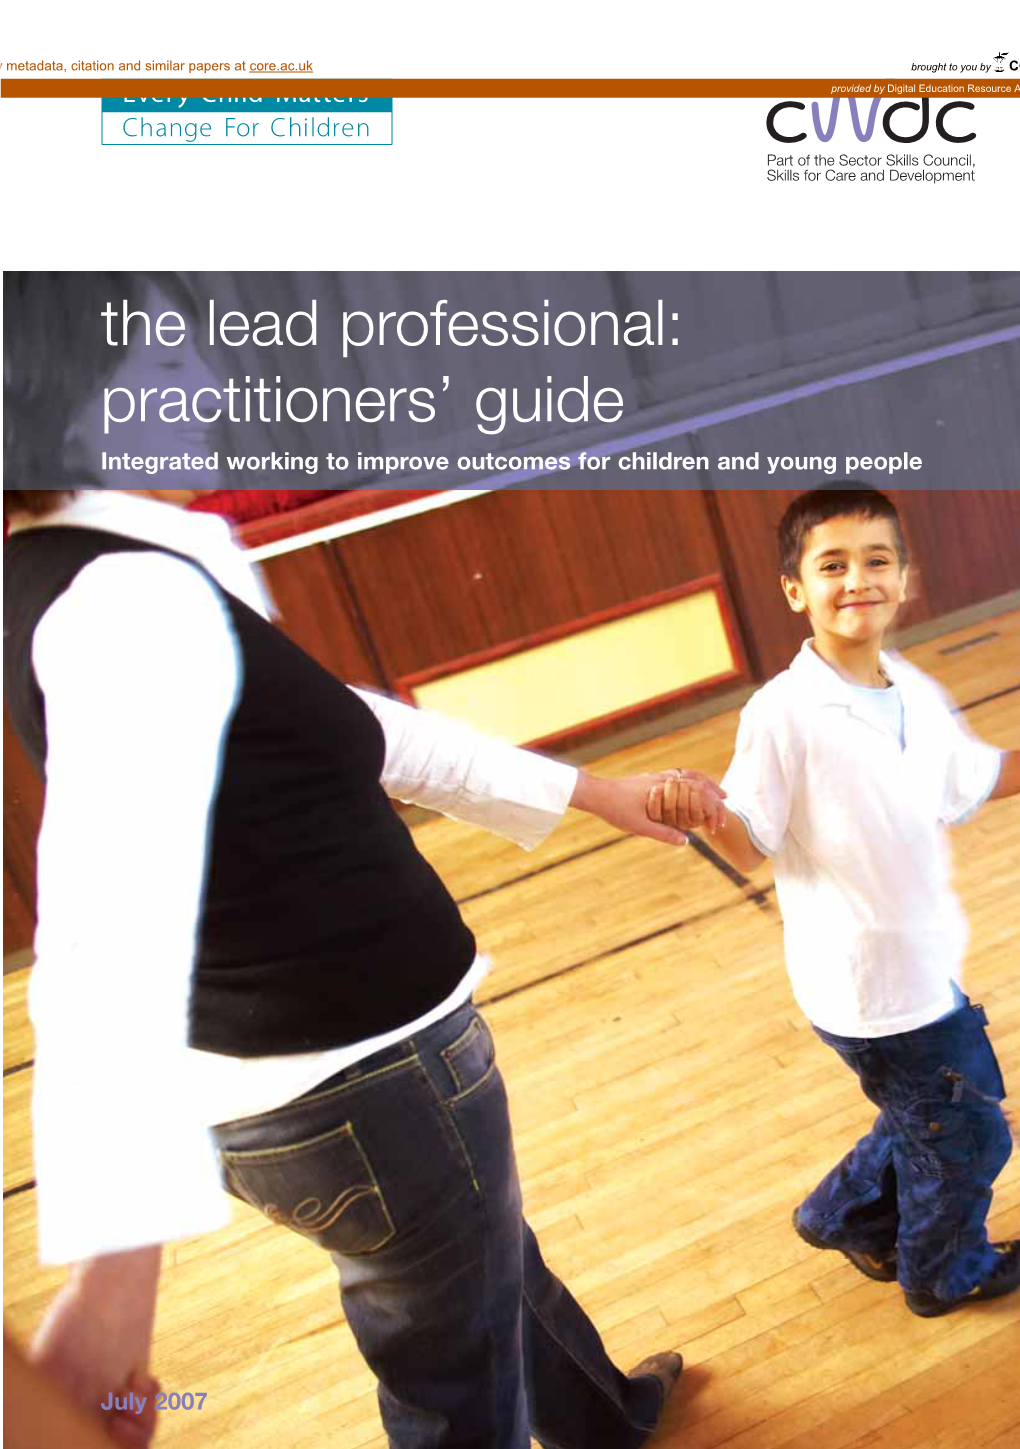 The Lead Professional: Practitioners’ Guide Integrated Working to Improve Outcomes for Children and Young People